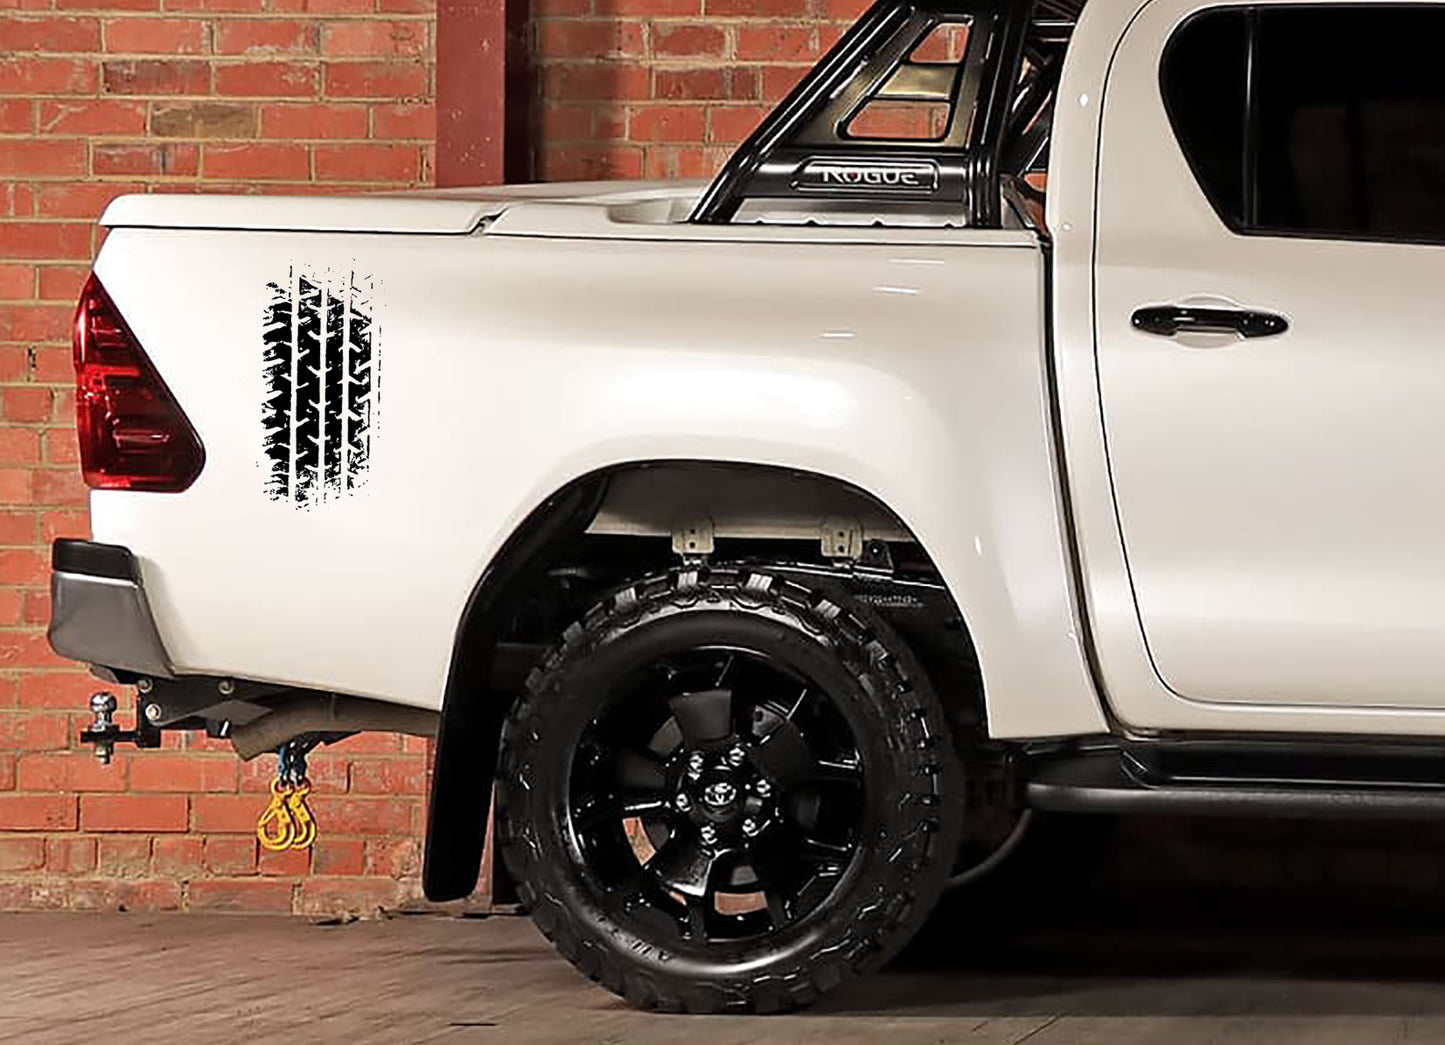 4x4 Offroad Tyre Marks Toyota Hilux Bakkie Vinyl Sticker Graphics Kit South Africa